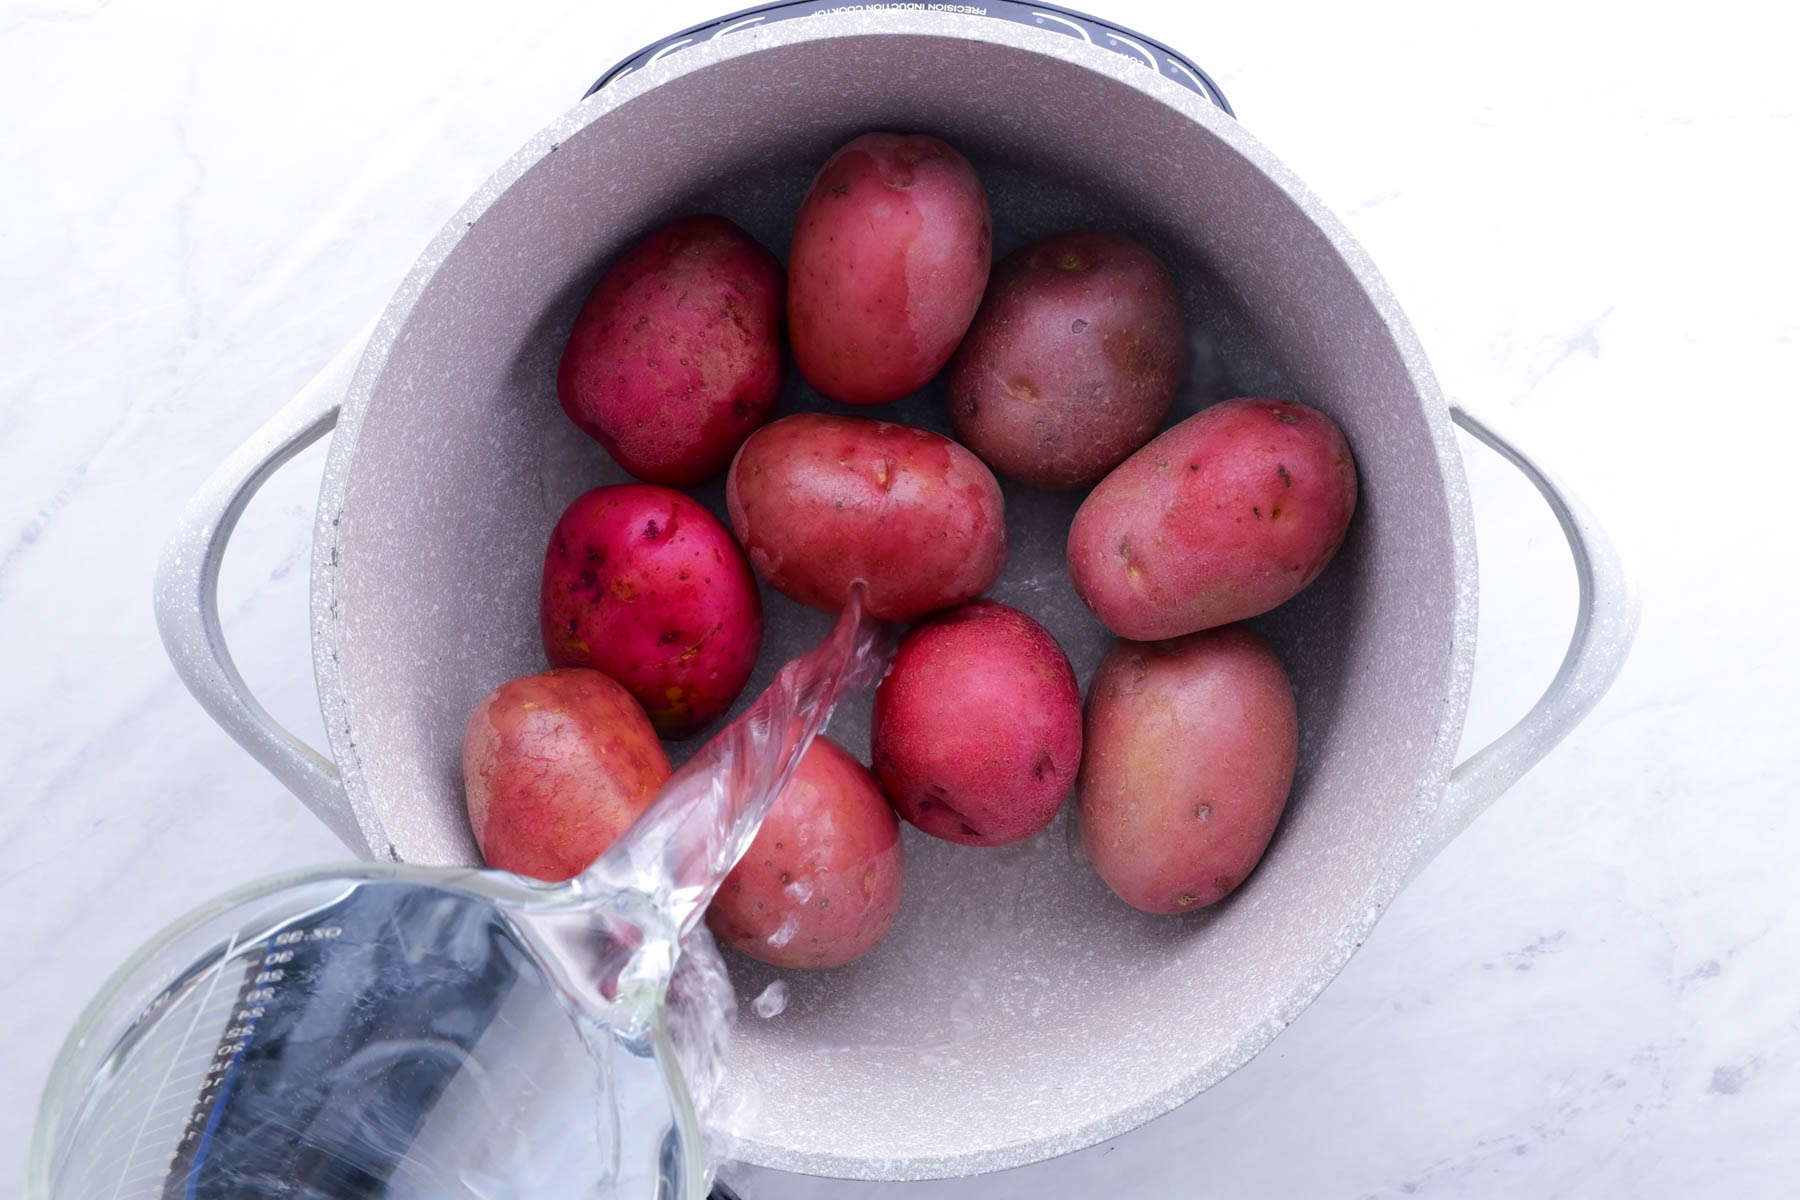 Red potatoes are added to a pot to boil.